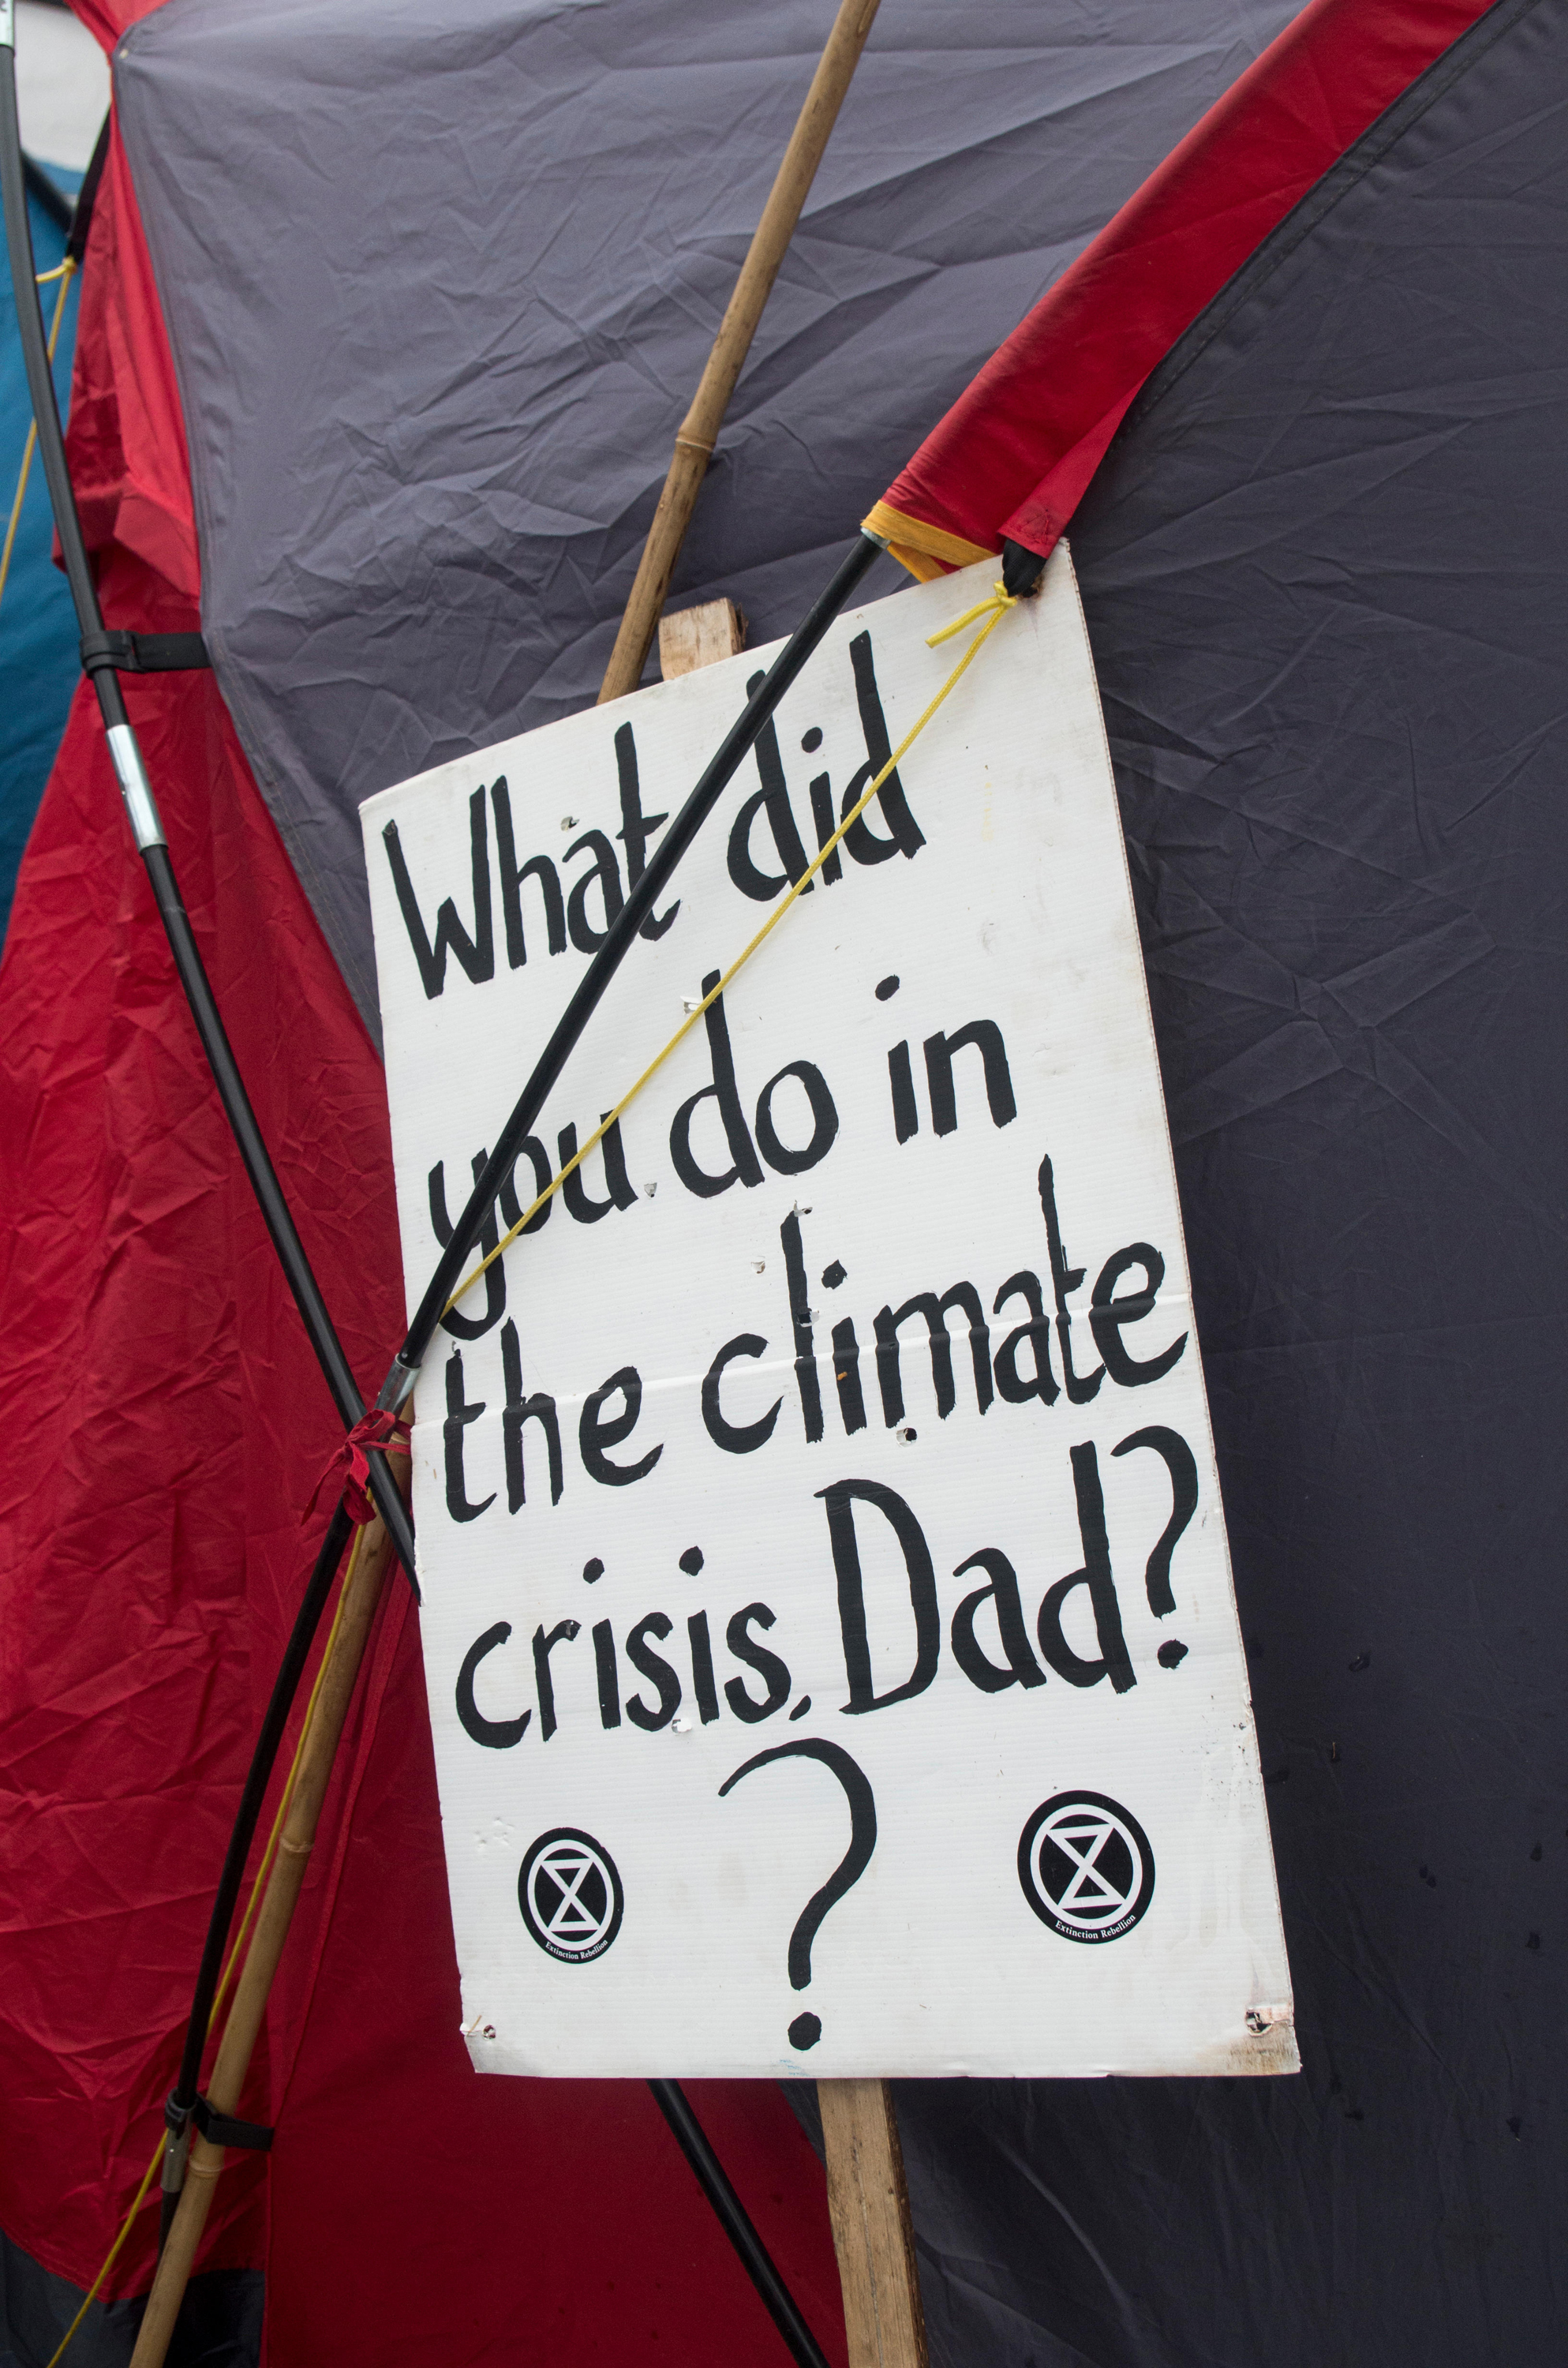 How do you decide whether or not to have children when faced with the climate crisis?, fcf5e689 6409 4235 998a 8740925119a9%, daily-dad, news, lifestyle%